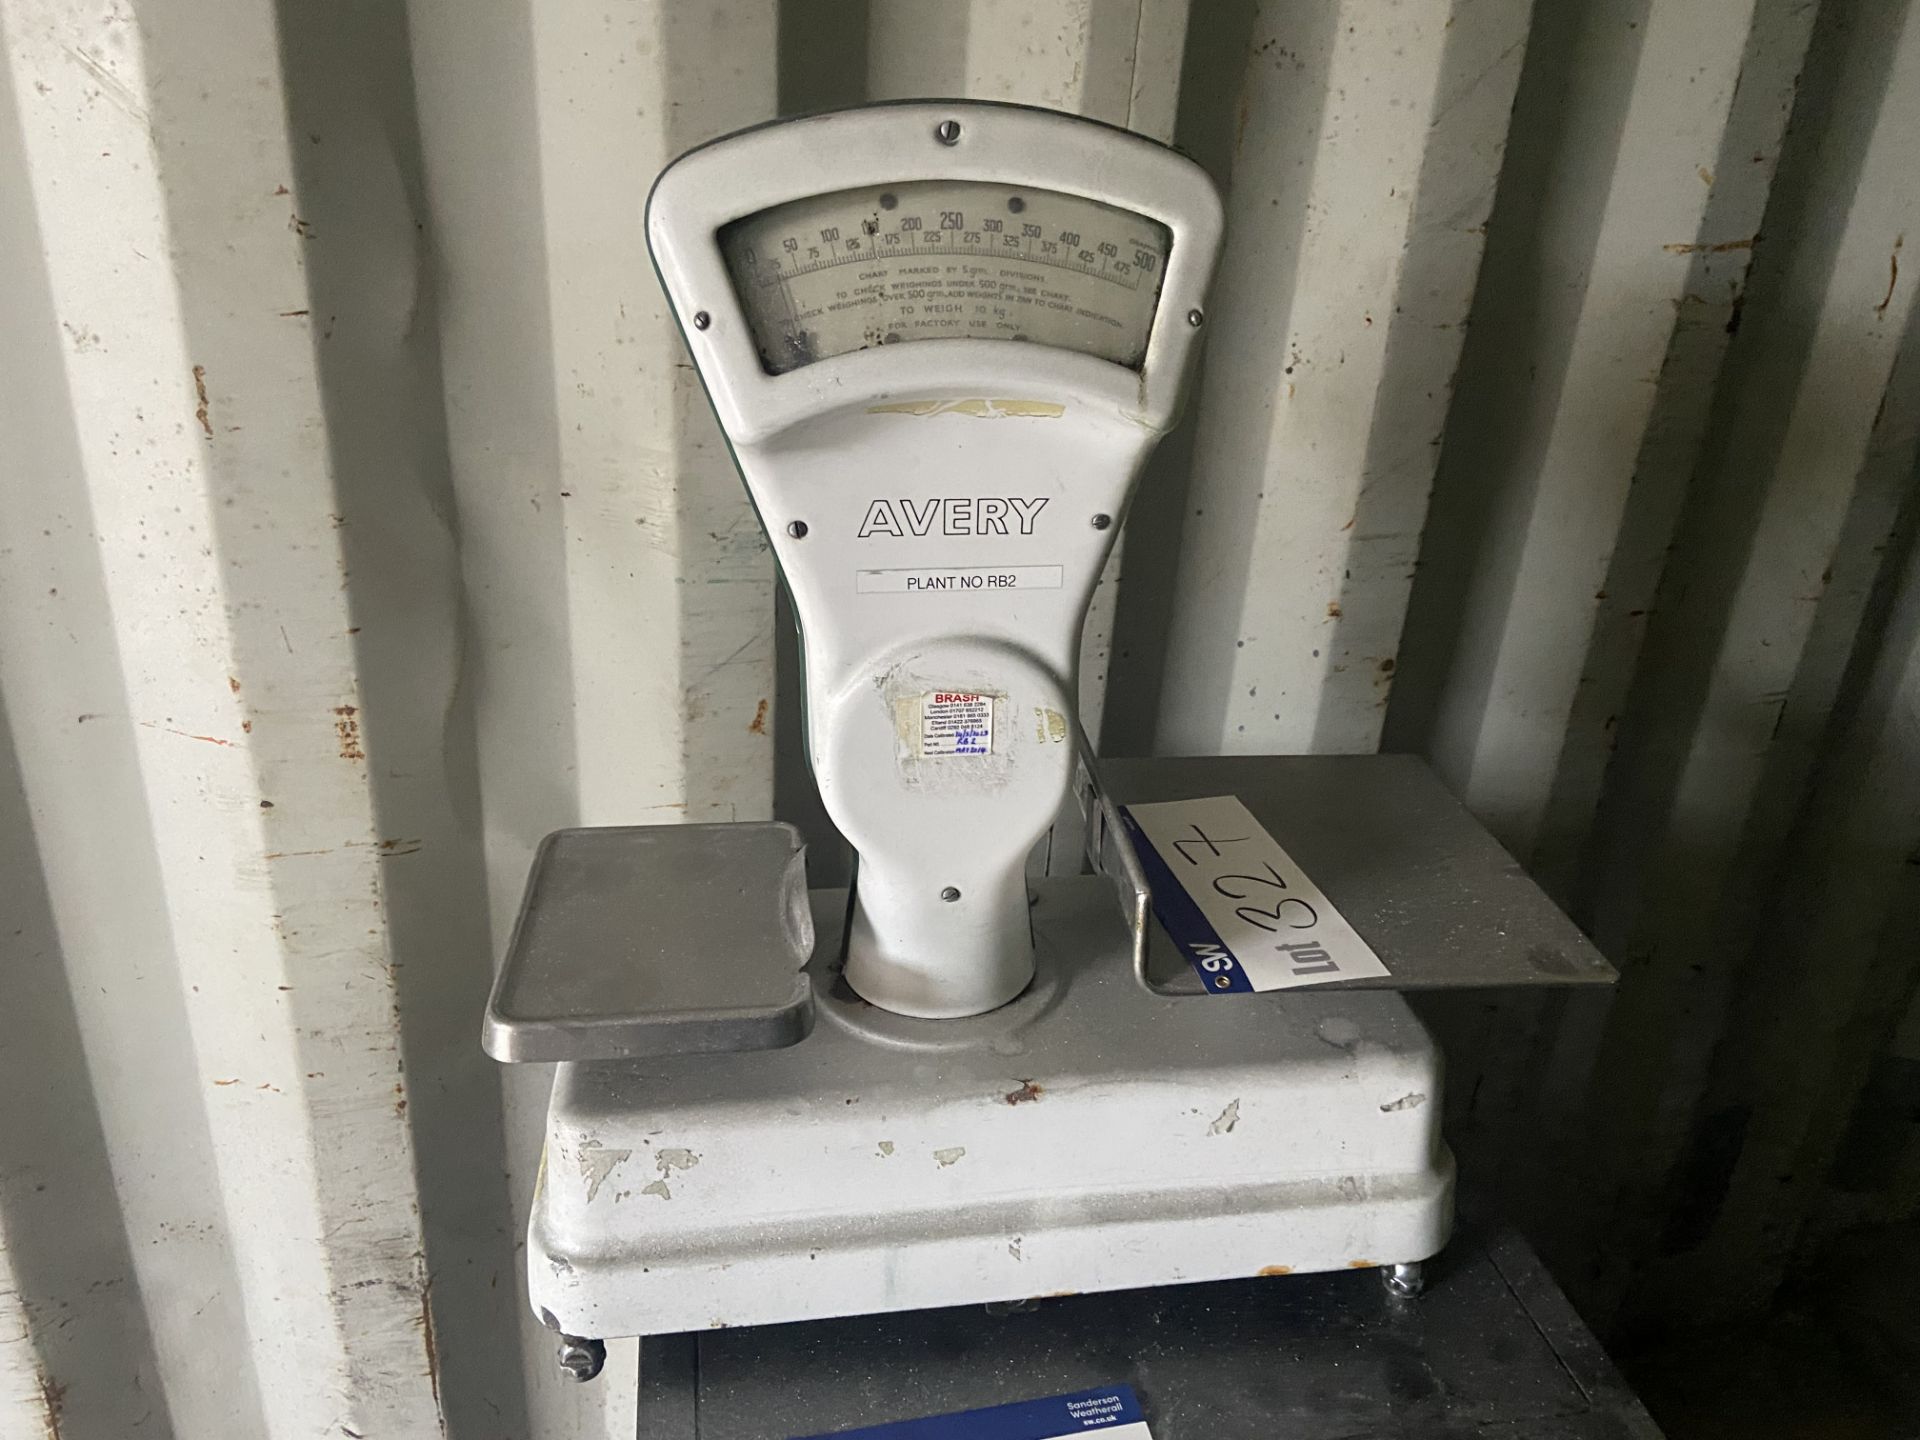 Avery Weighing Scale (please note - there is no fork lift truck on site for loading) Please read the